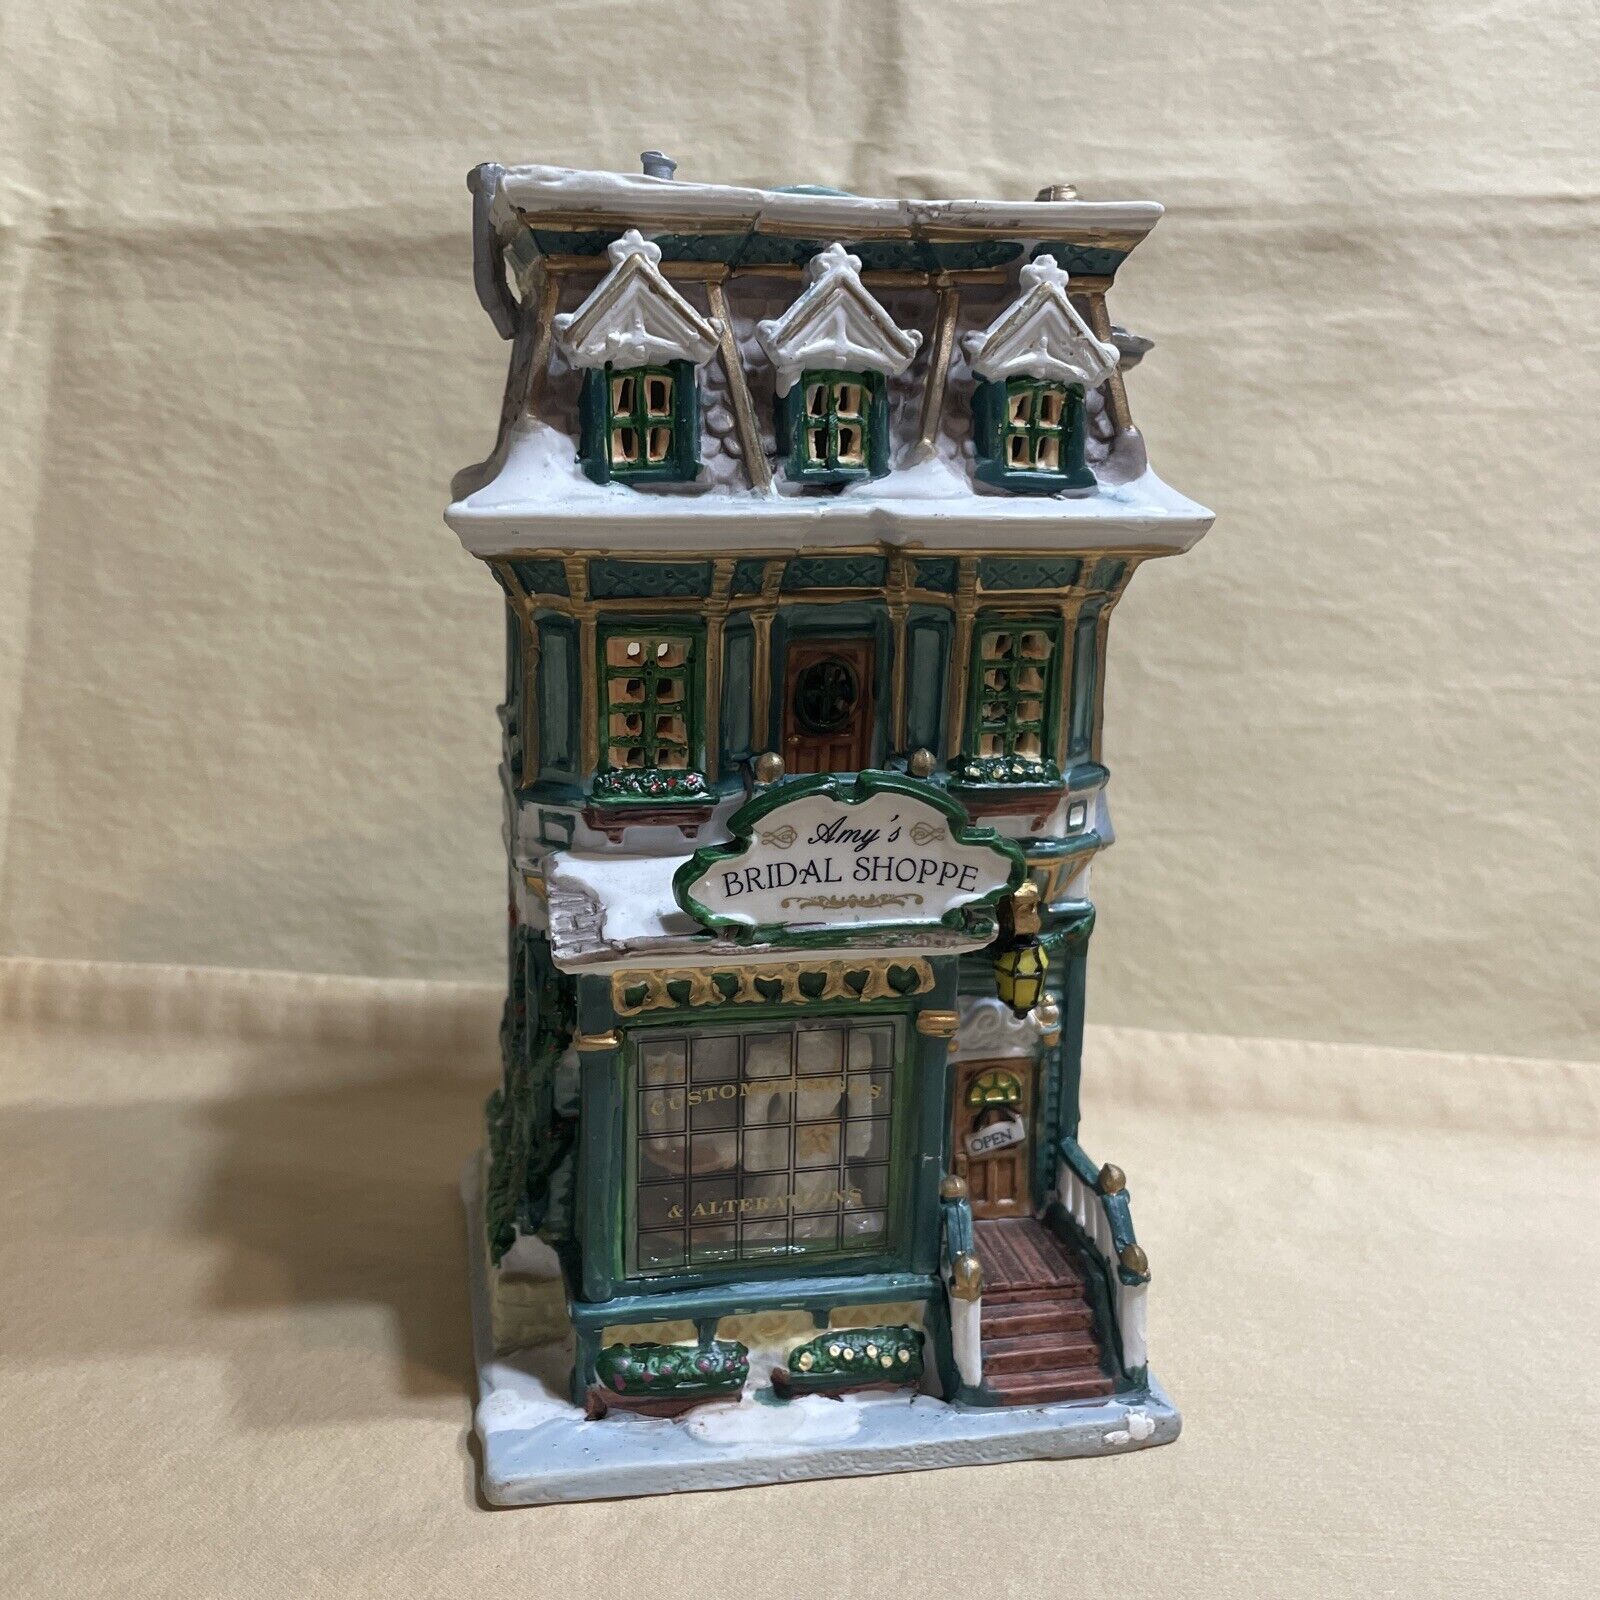 Lemax 2002 Amy's Bridal Shoppe Porcelain Lighted Building House, No Power Cord